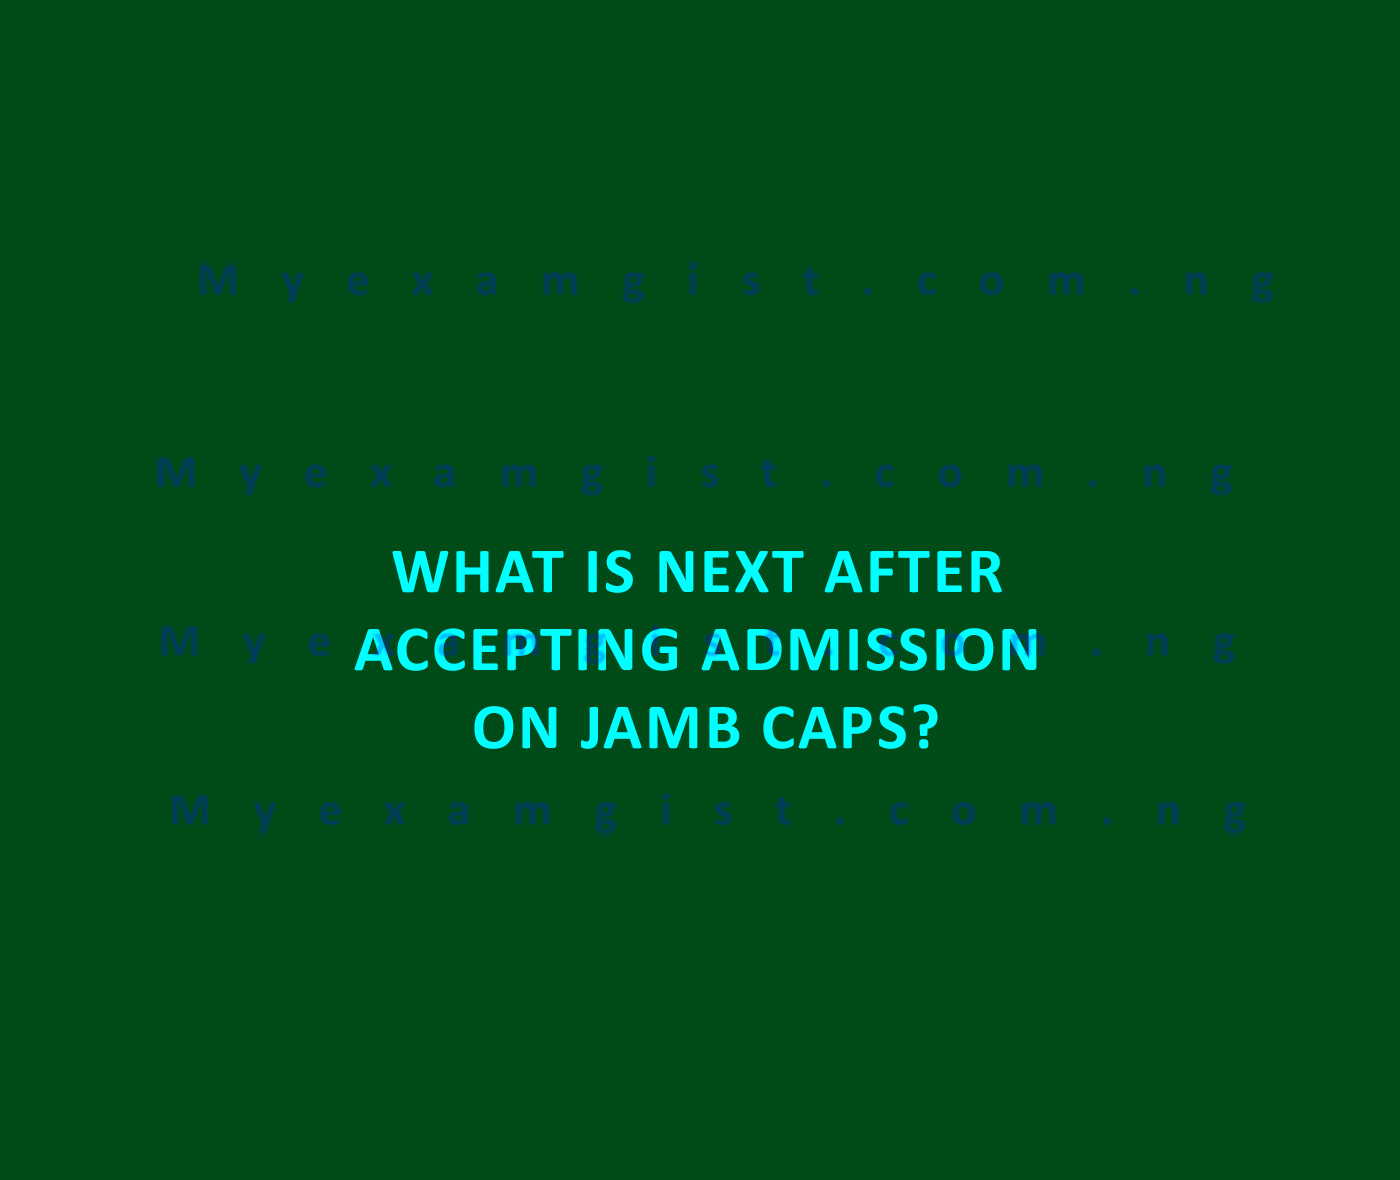 What is next after accepting admission on JAMB caps?